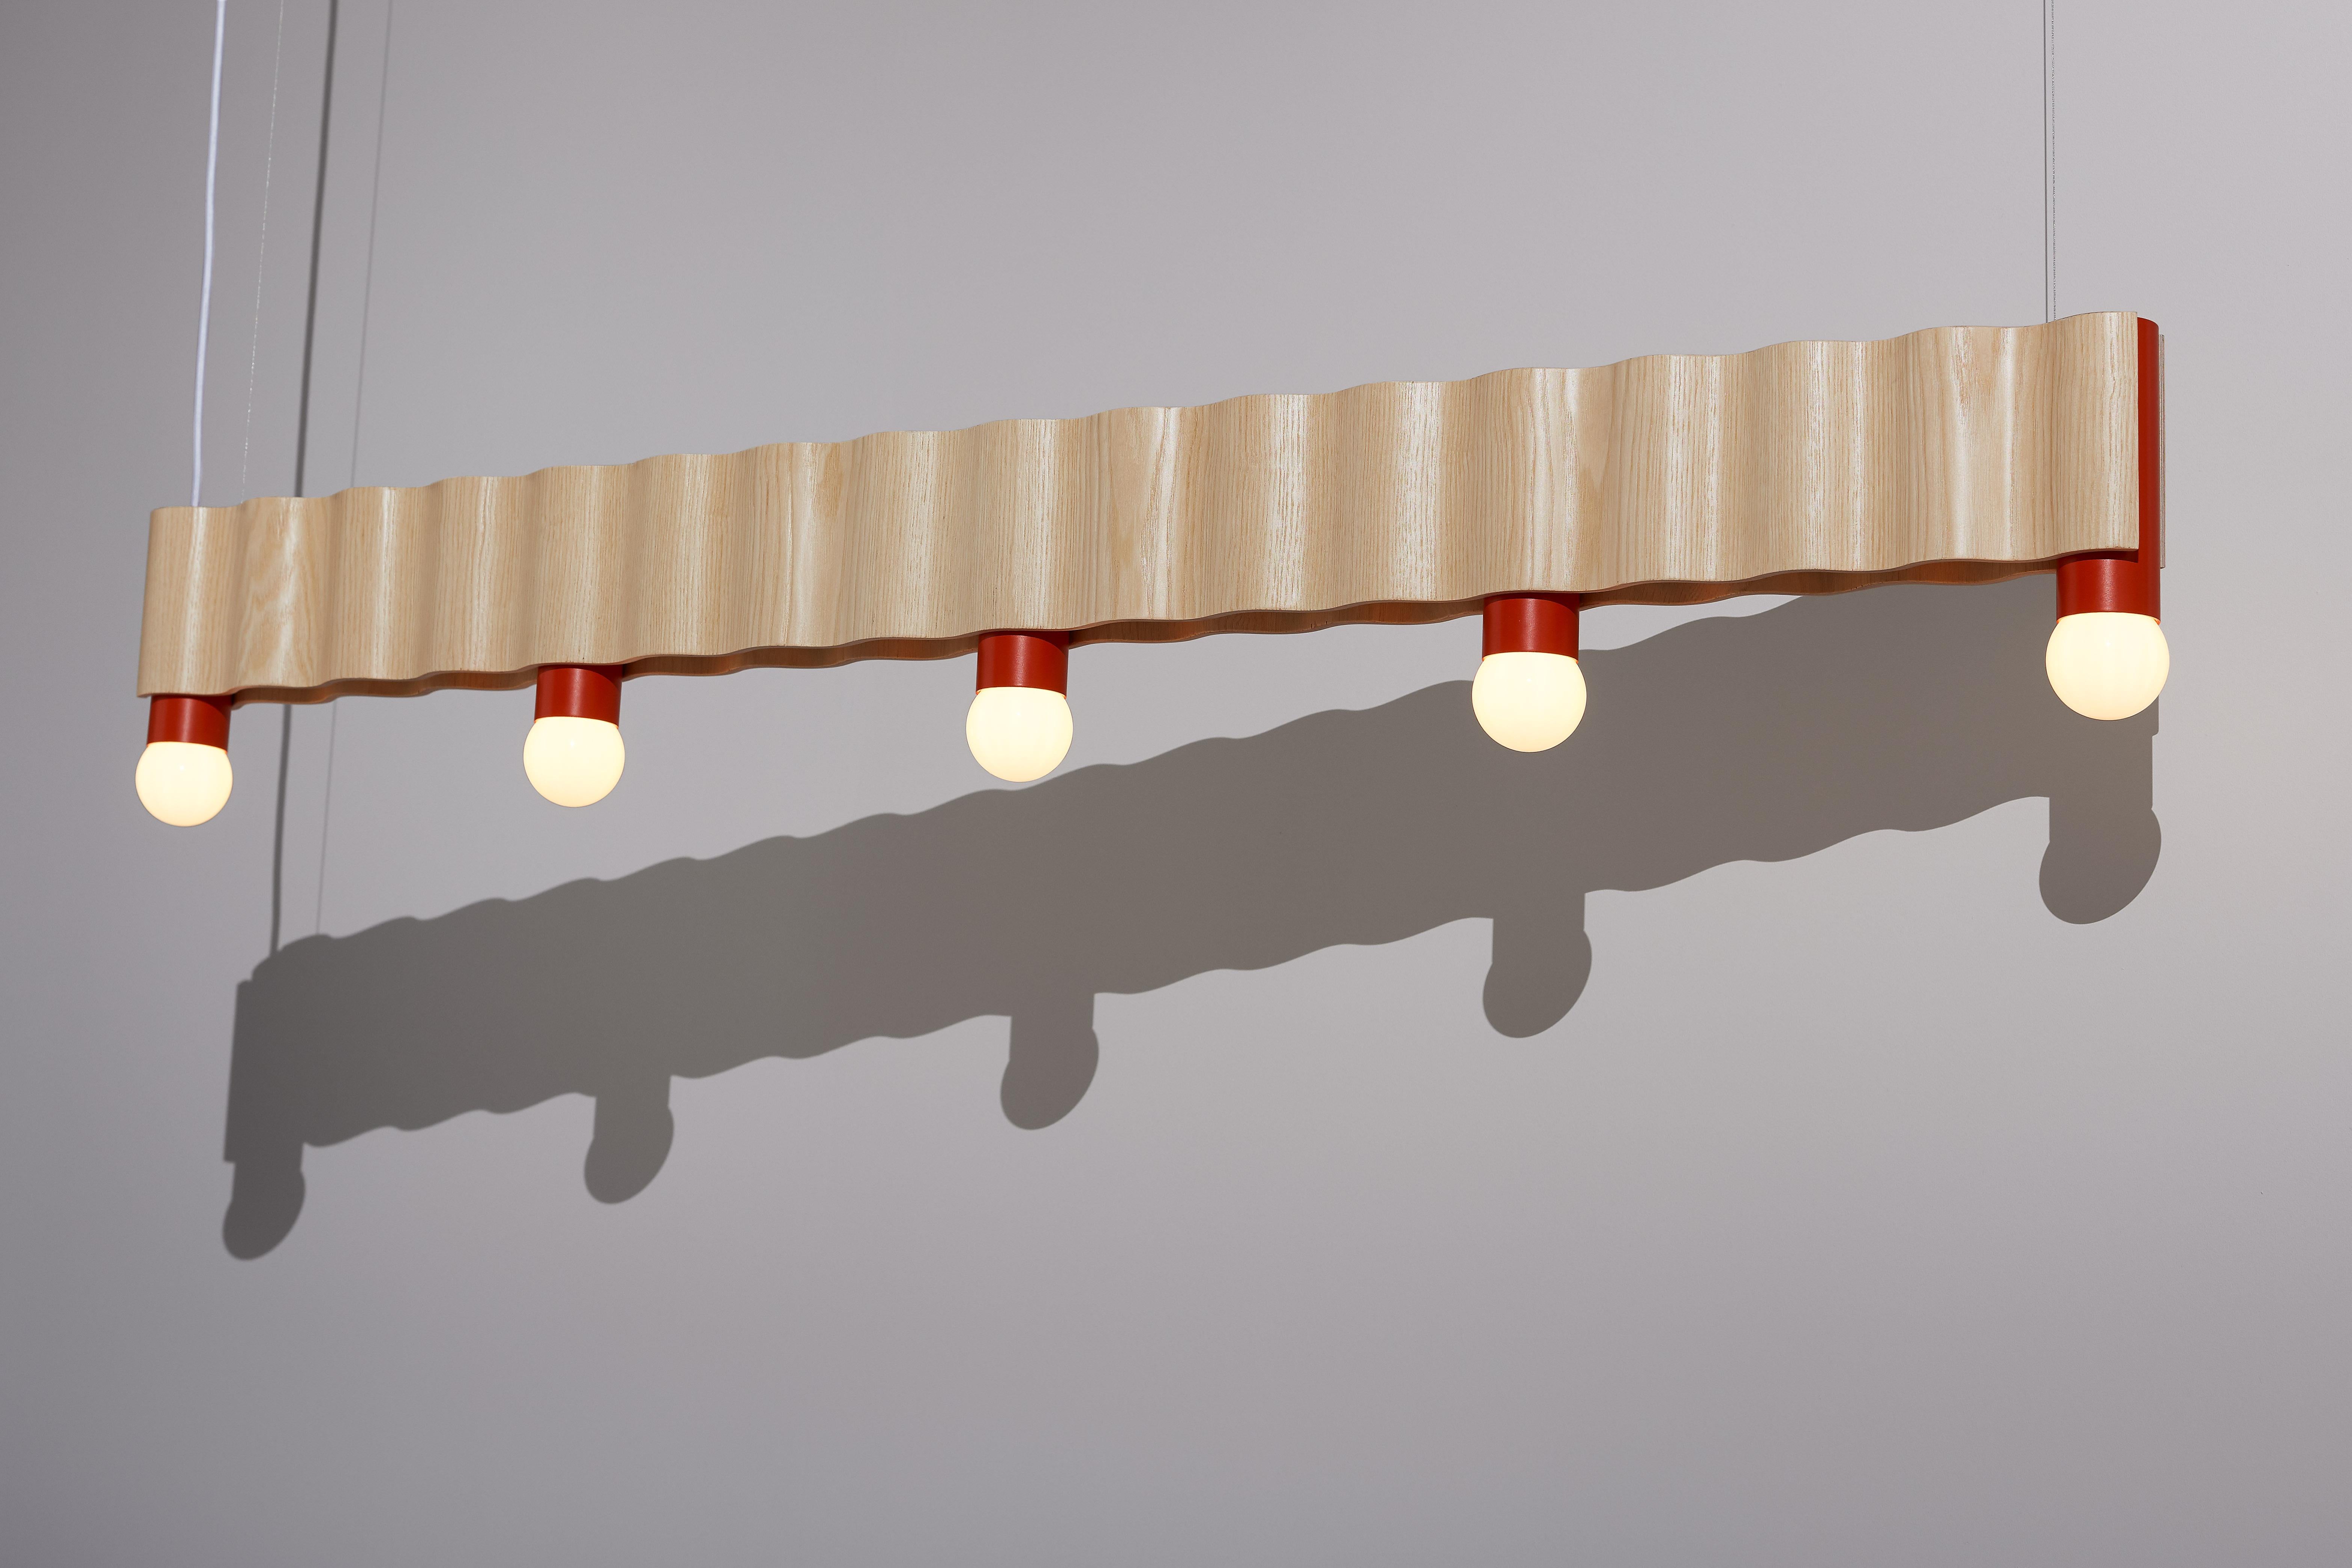 Linear corrugation pendant light (5 bulbs) made from natural ash veneered plywood (clear coated) and vermilion red powder-coated aluminium tubes.

Created in collaboration with Tino Seubert.

The linear pendant also comes as a shorter 4-bulb